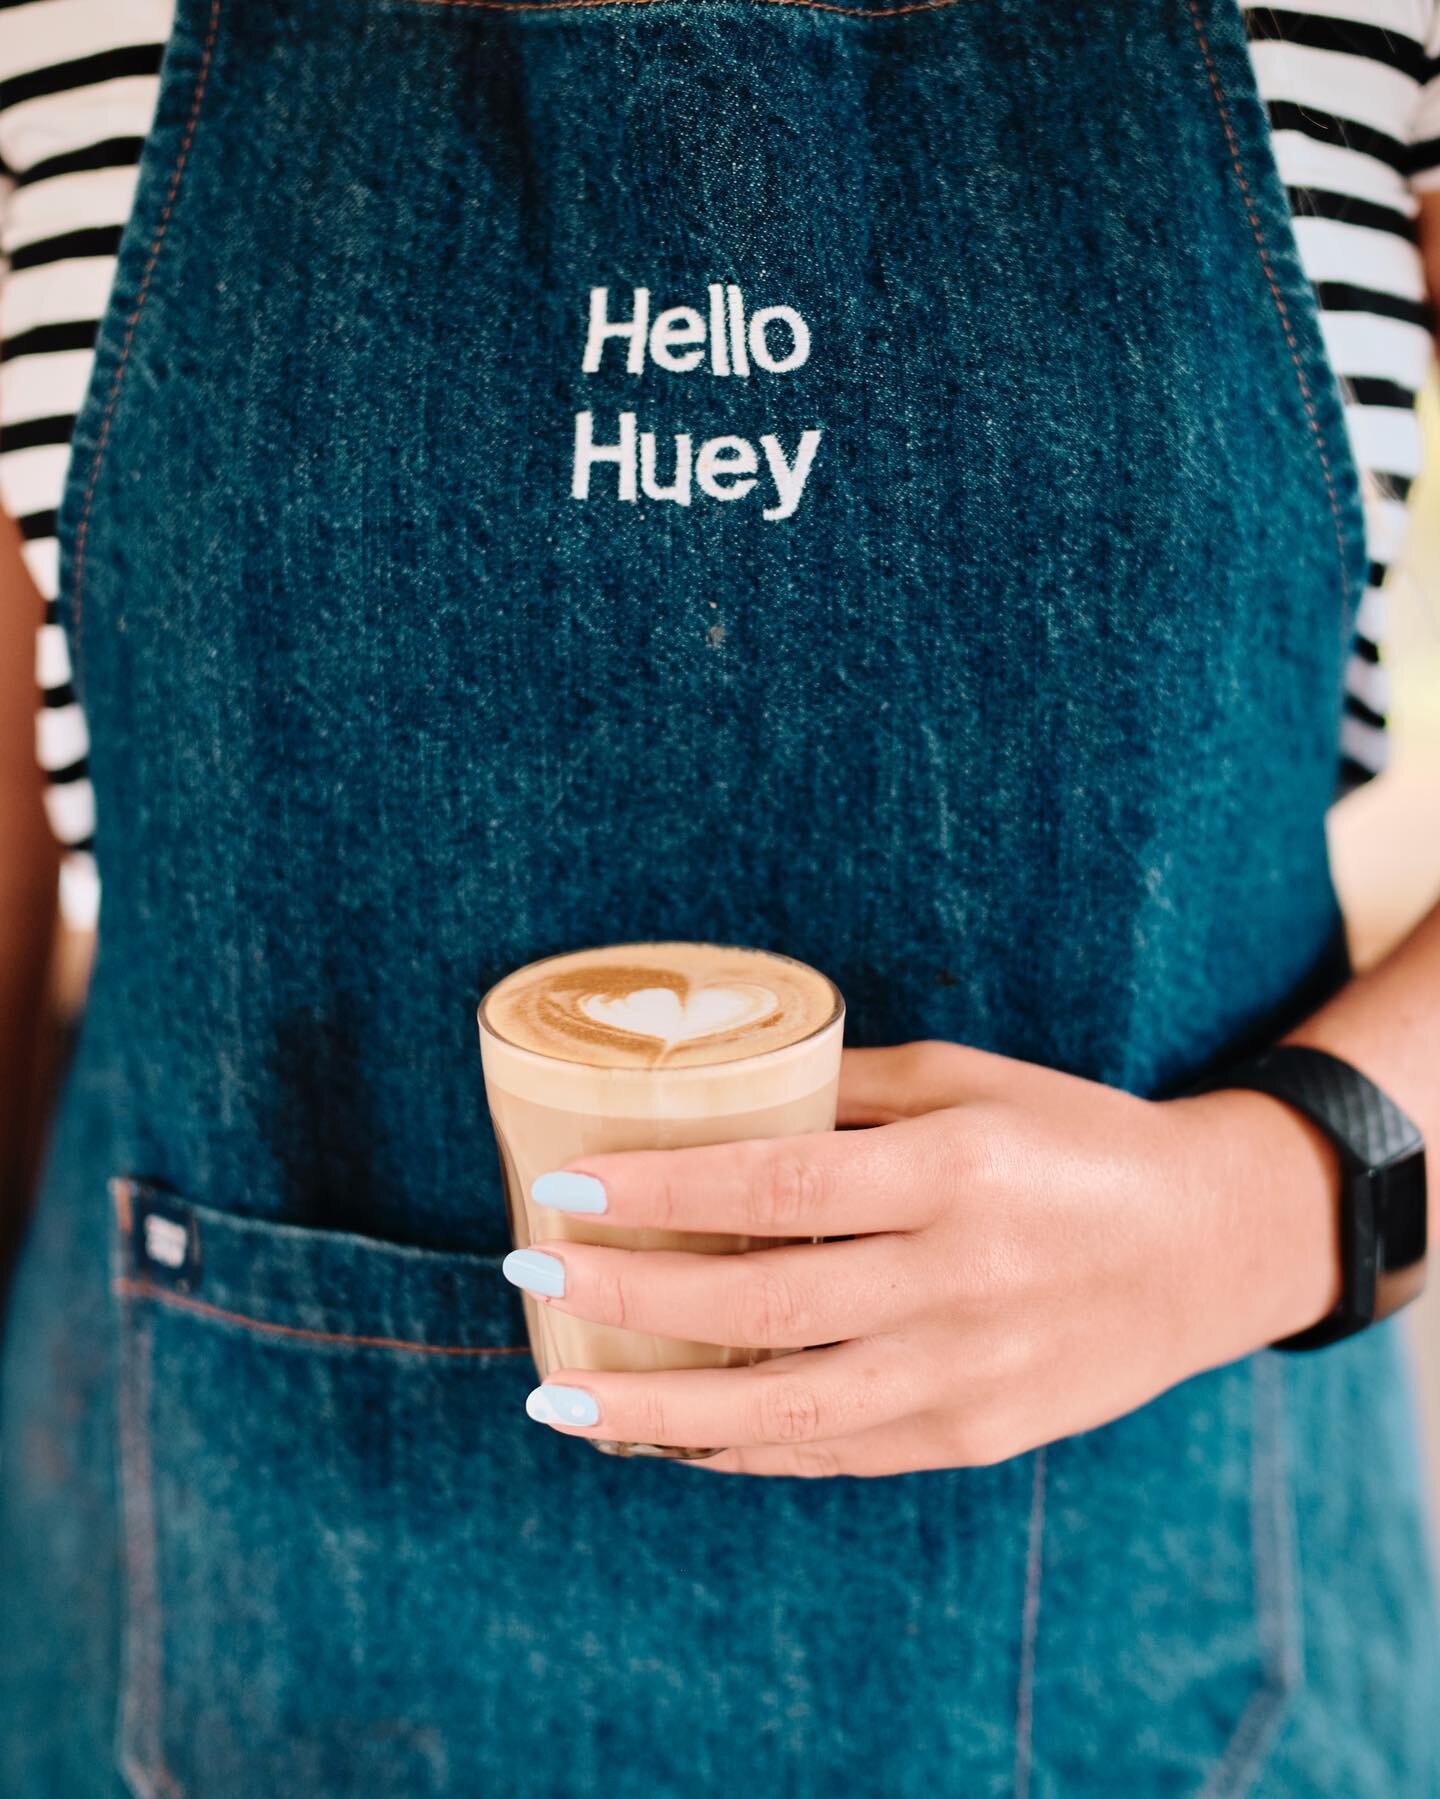 Hey Everyone! ☕️⭐️
We've seen lots of new faces around here - WELCOME to Hello Huey! 
We're a vintage-style caravan located in Narrawallee on the south coast. We love making coffee, starting conversations, and providing good service! We love to have 